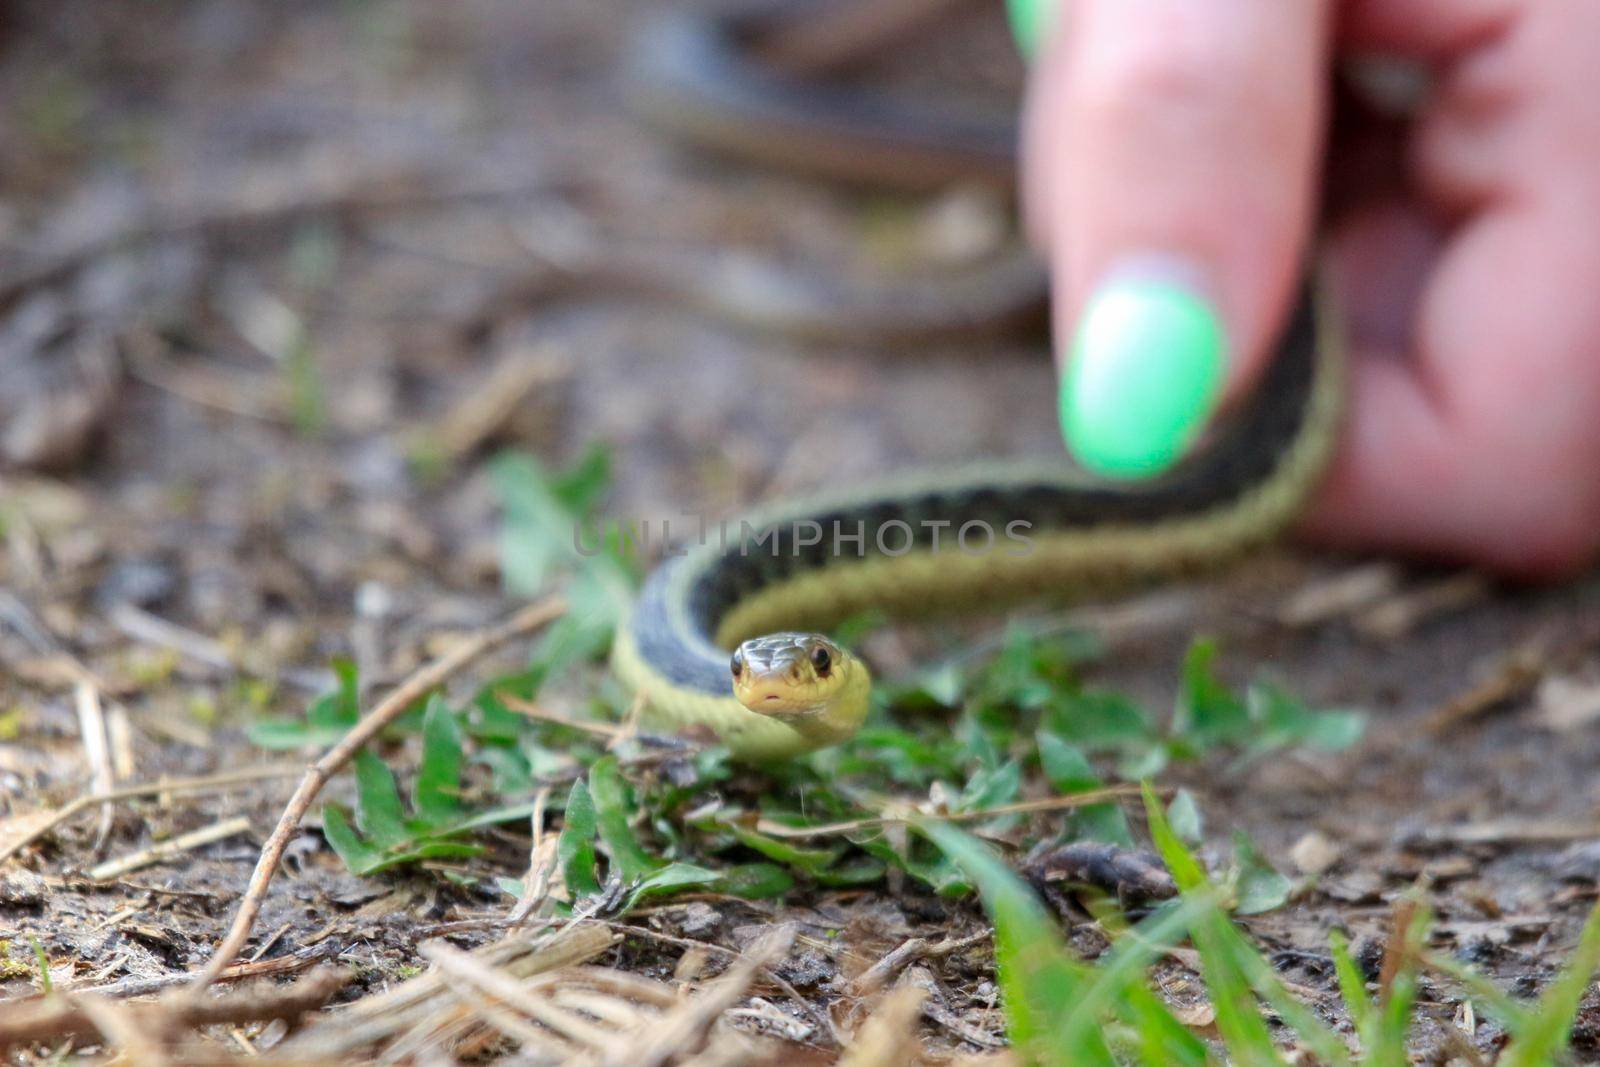 Eastern Garter snake (T. s. parietalis) photographed in Ontario Canada. High quality photo